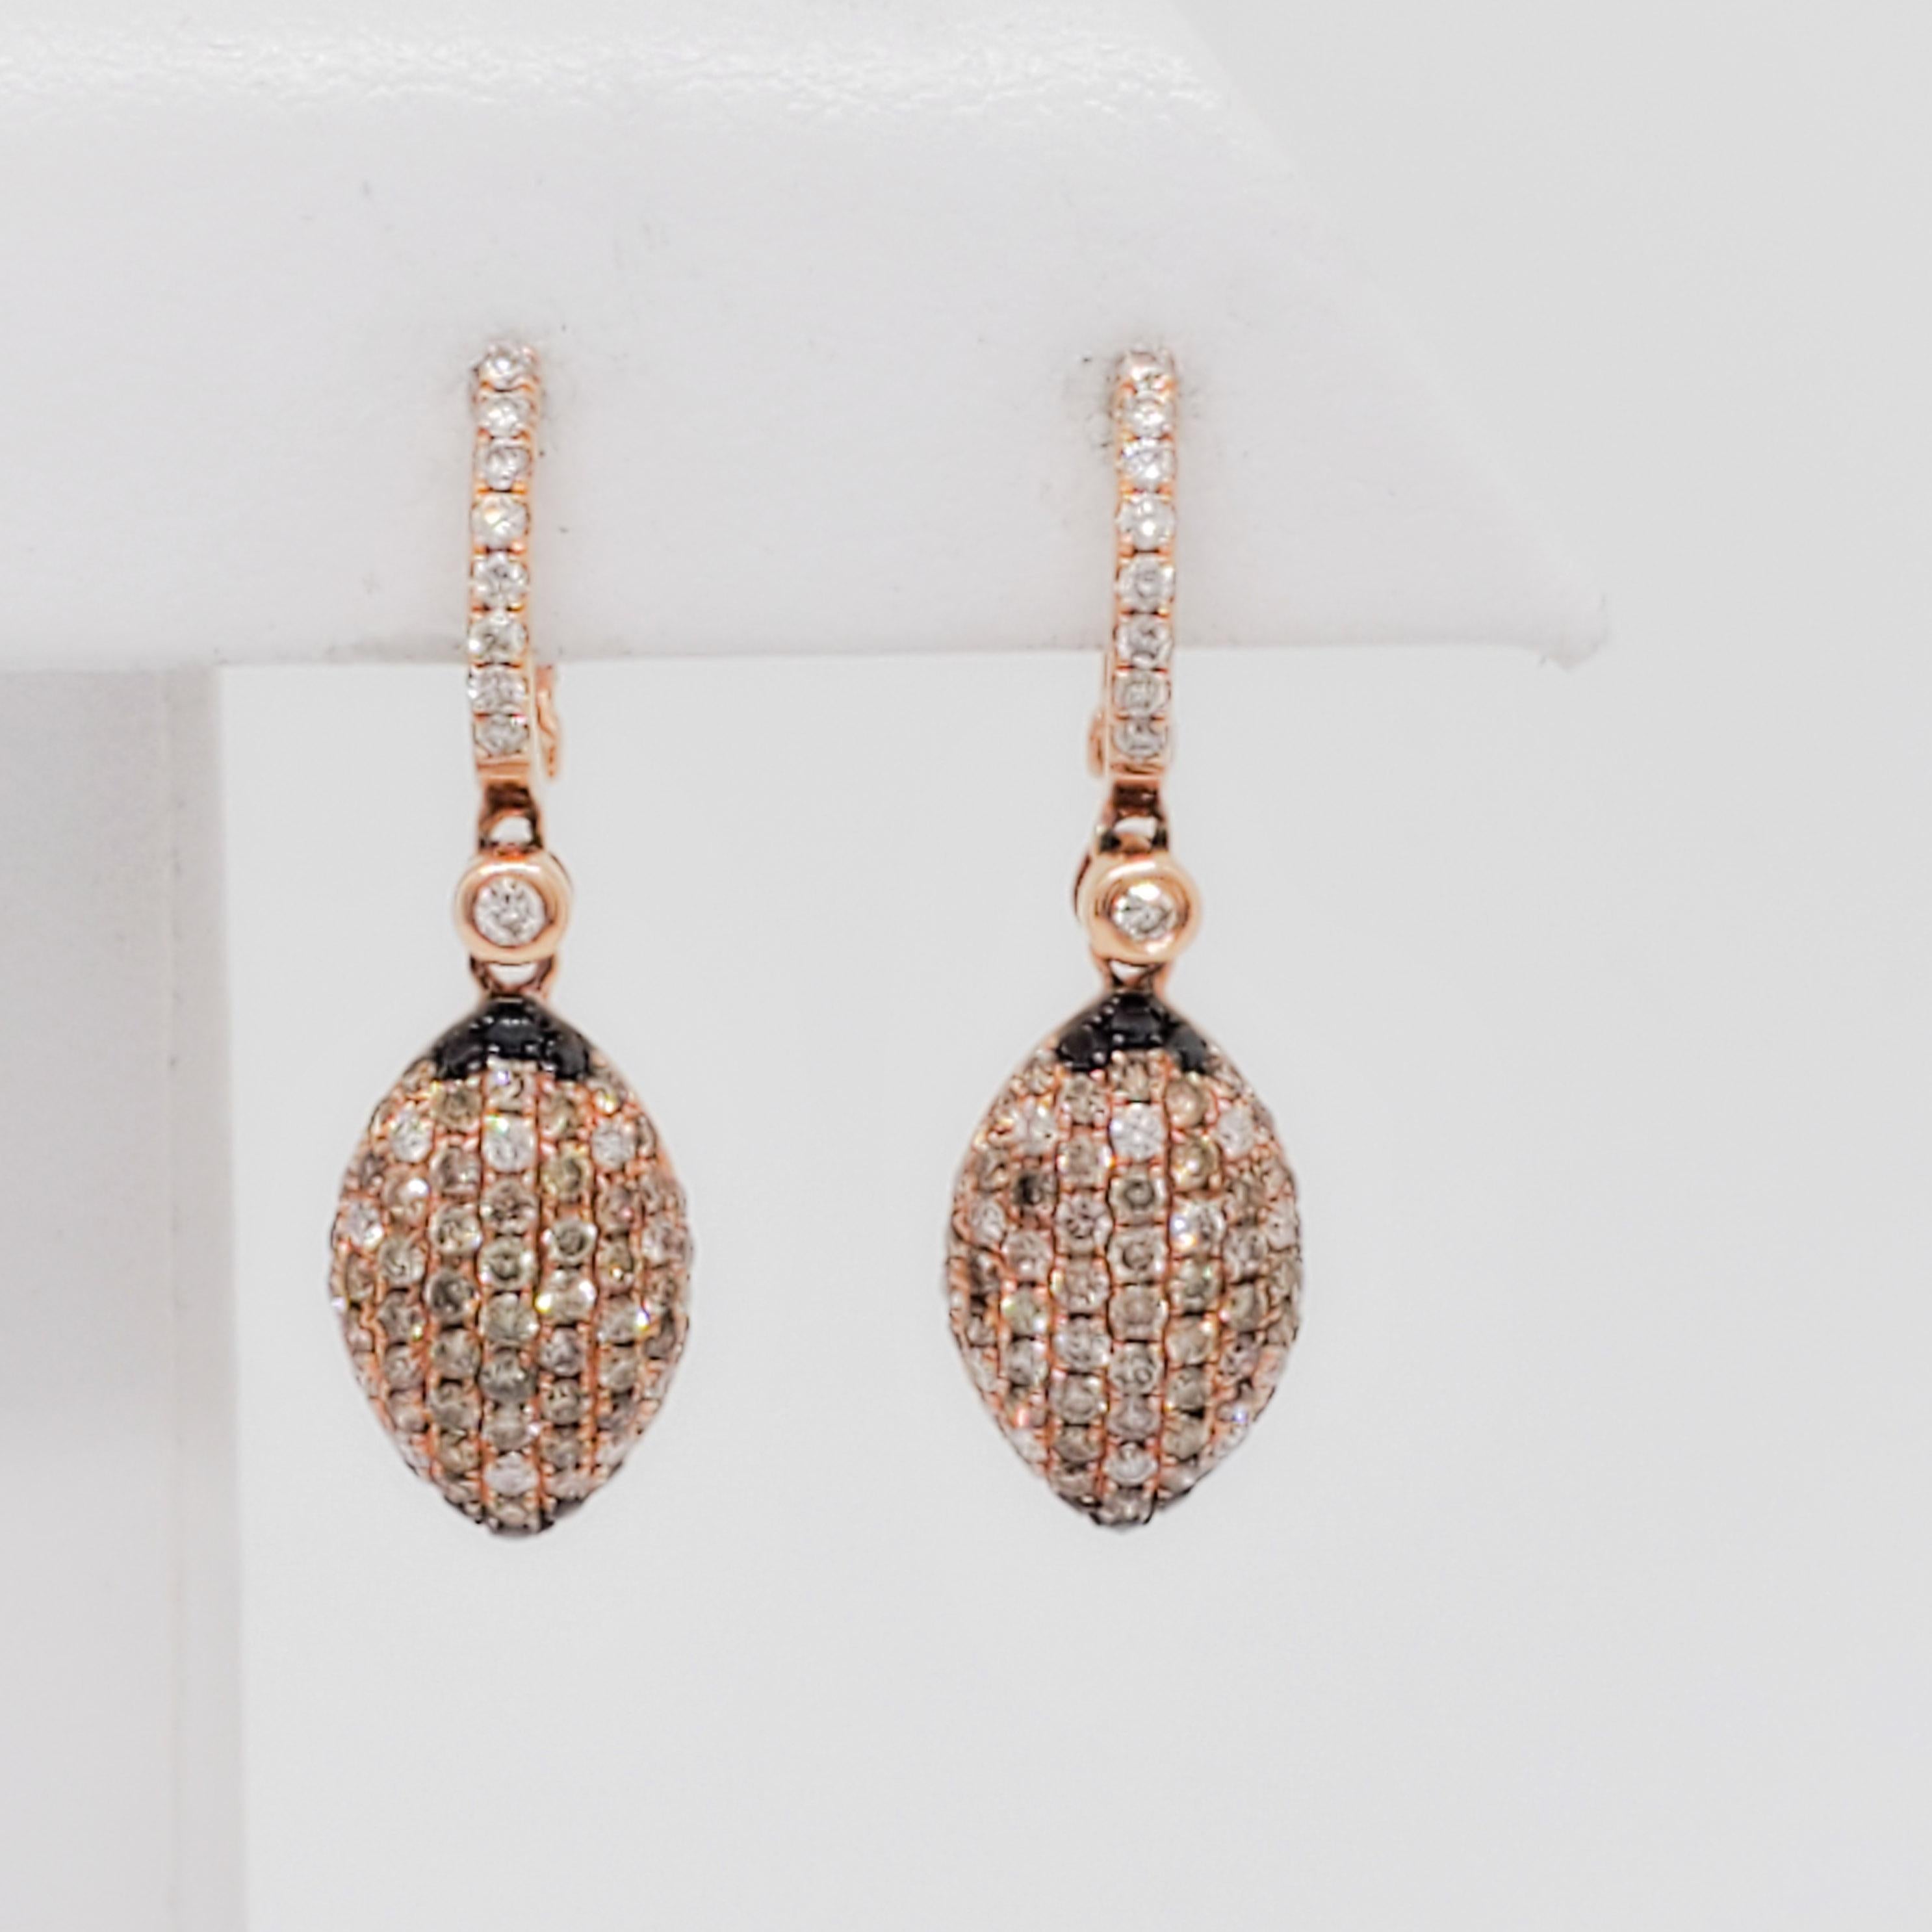 Gorgeous drop earrings with 1.53 ct. of white and black diamond rounds.  Handmade 14k rose gold mountings.